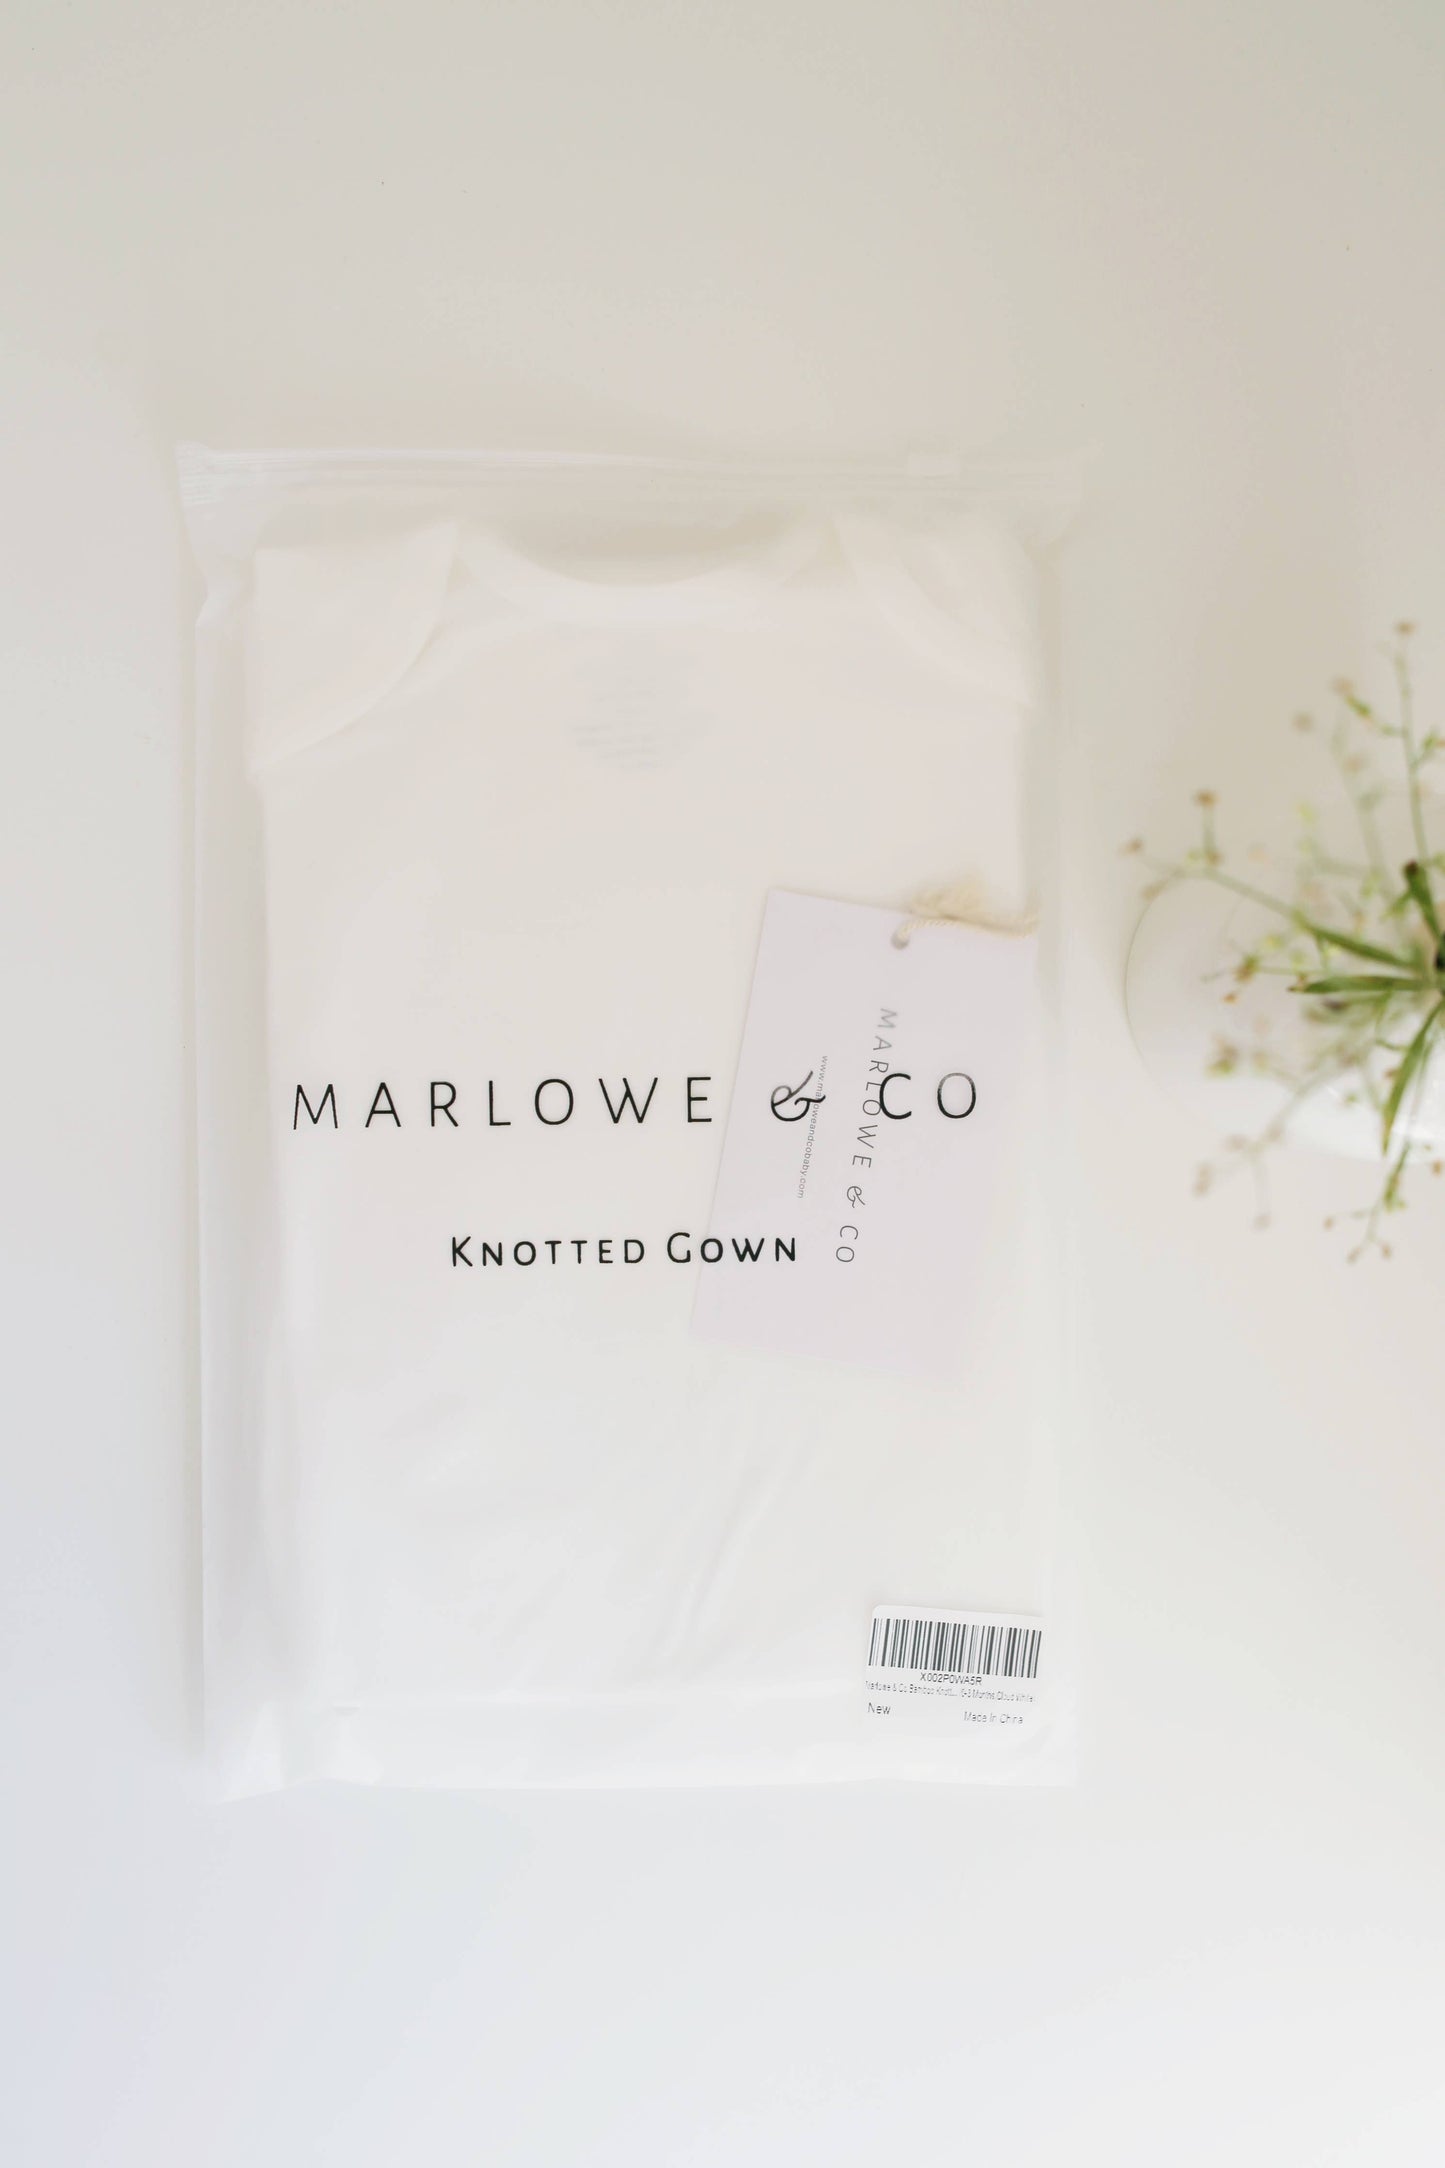 Marlowe & Co - Knotted Gowns in Assorted Colors